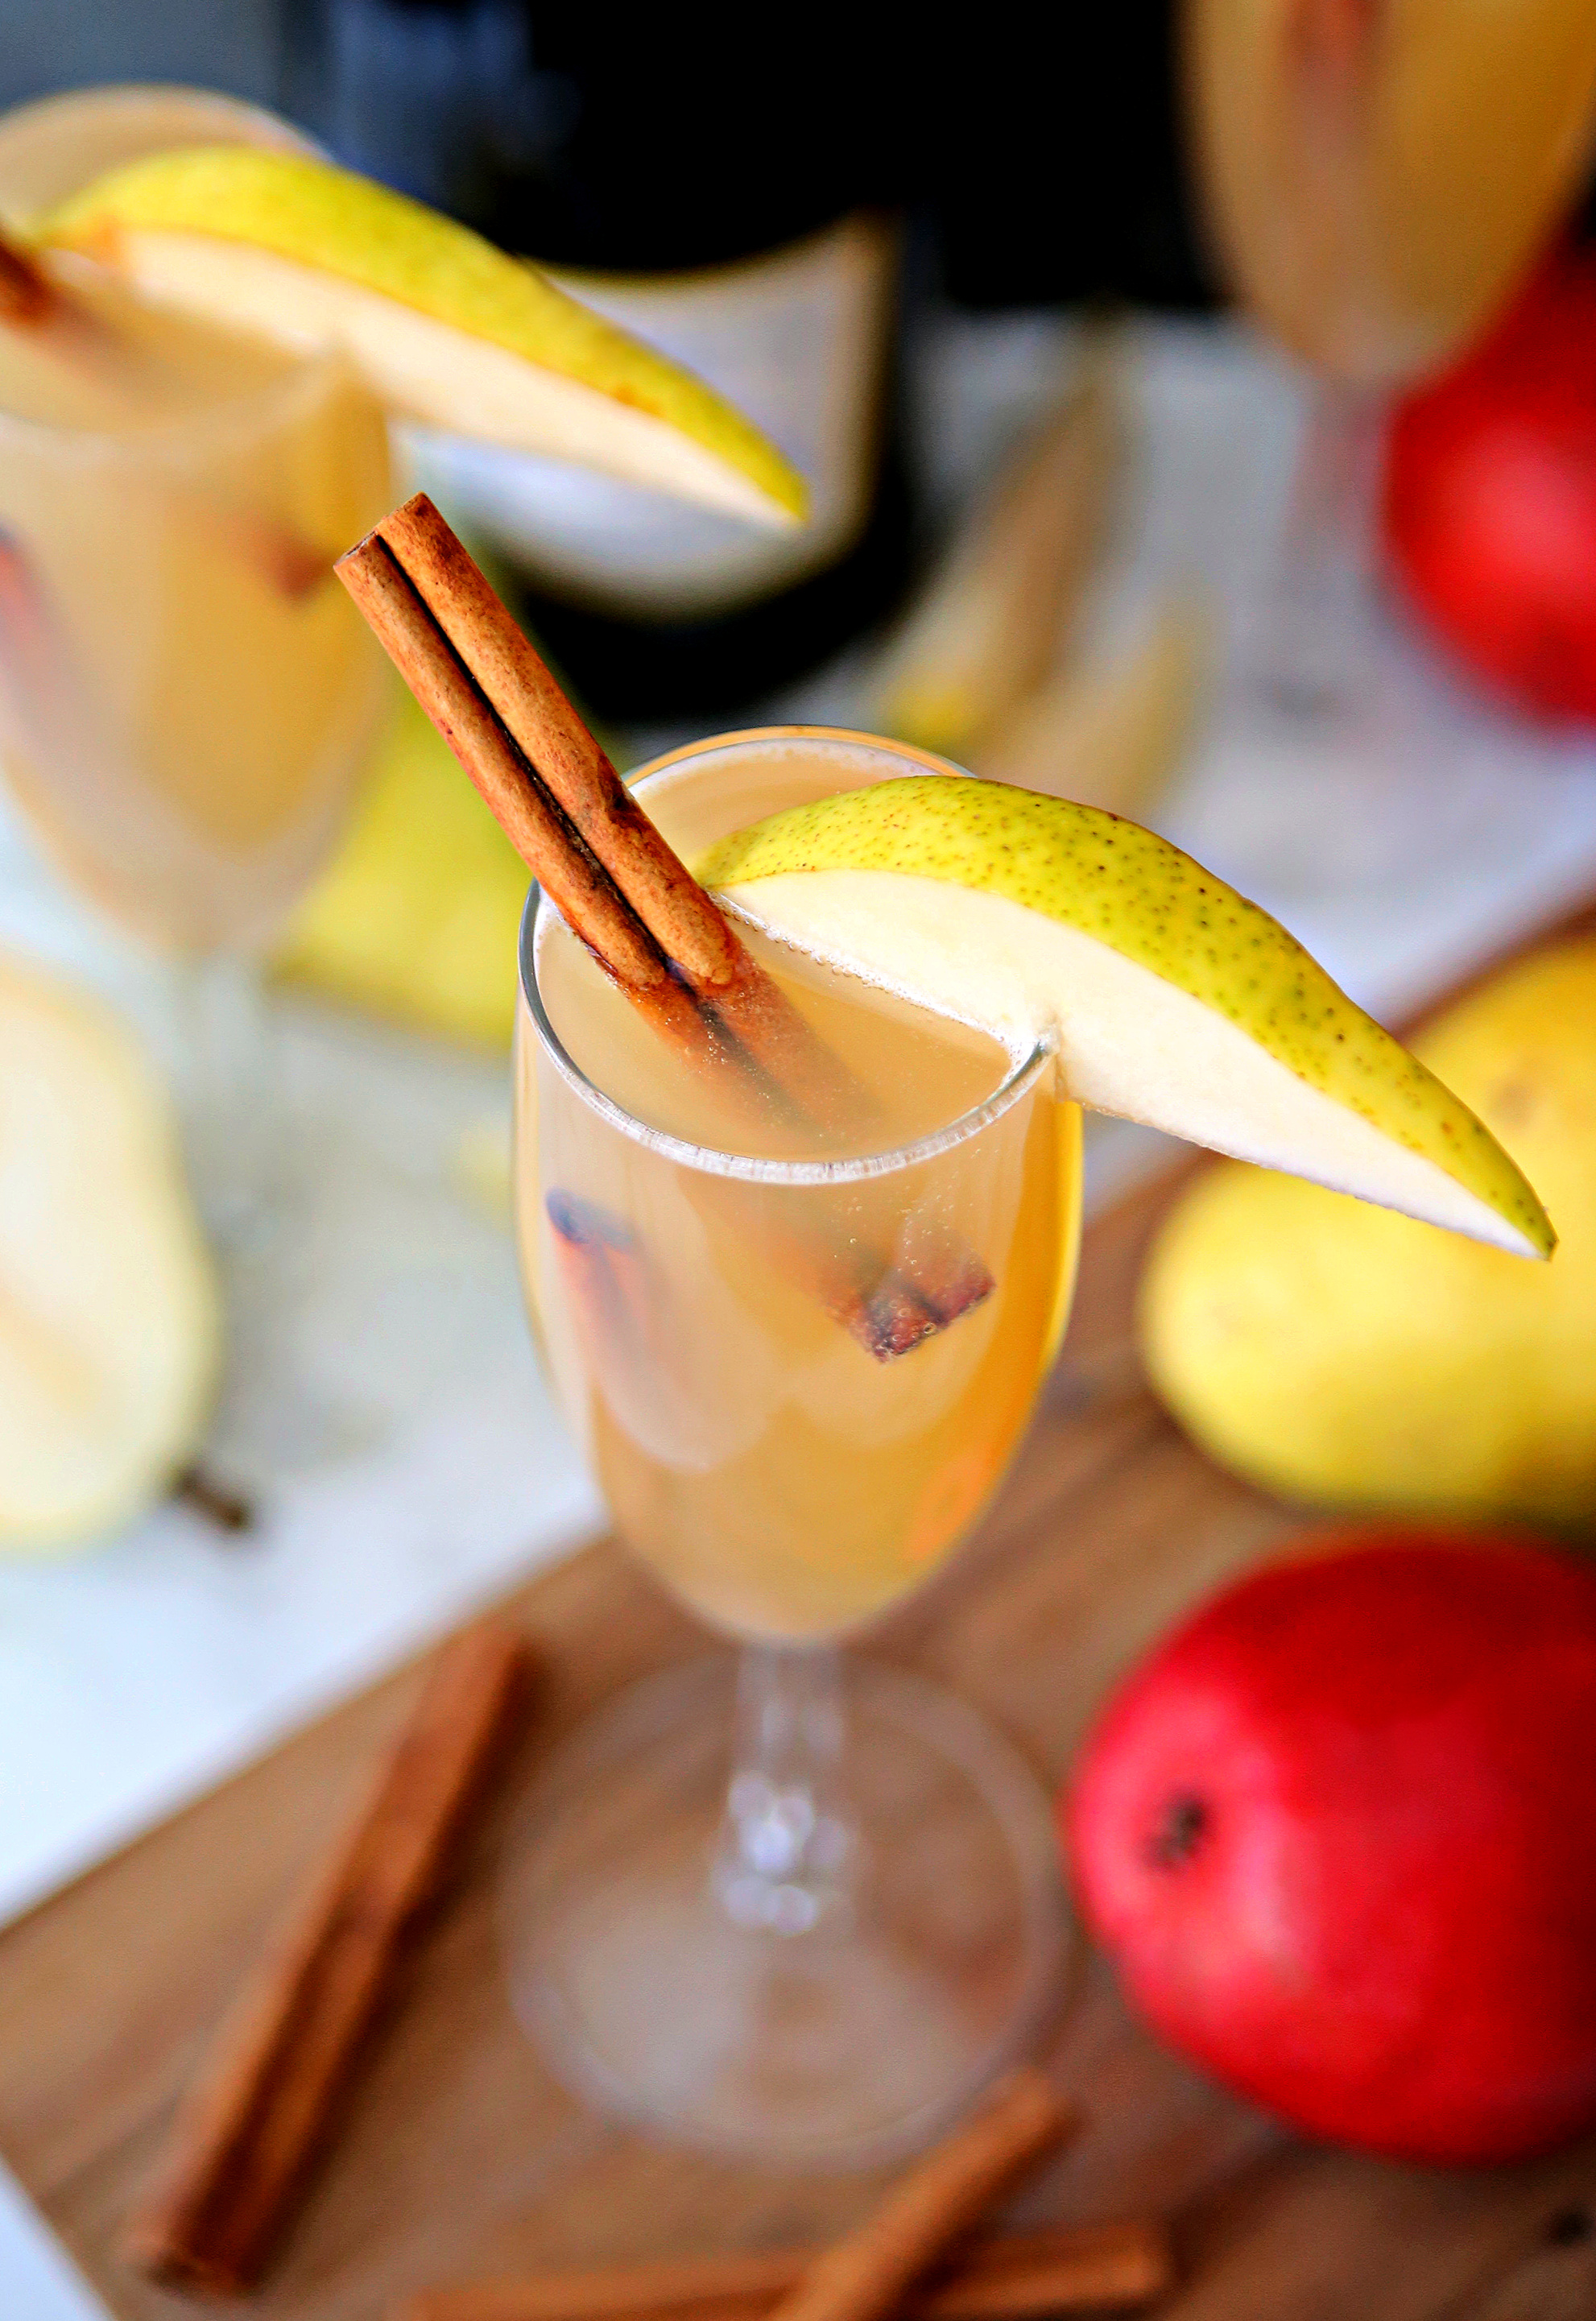 Celebrate the cooler weather with these Spiced Pear Bellinis. A delicious cocktail full of pear juice, Prosecco and fall spices.